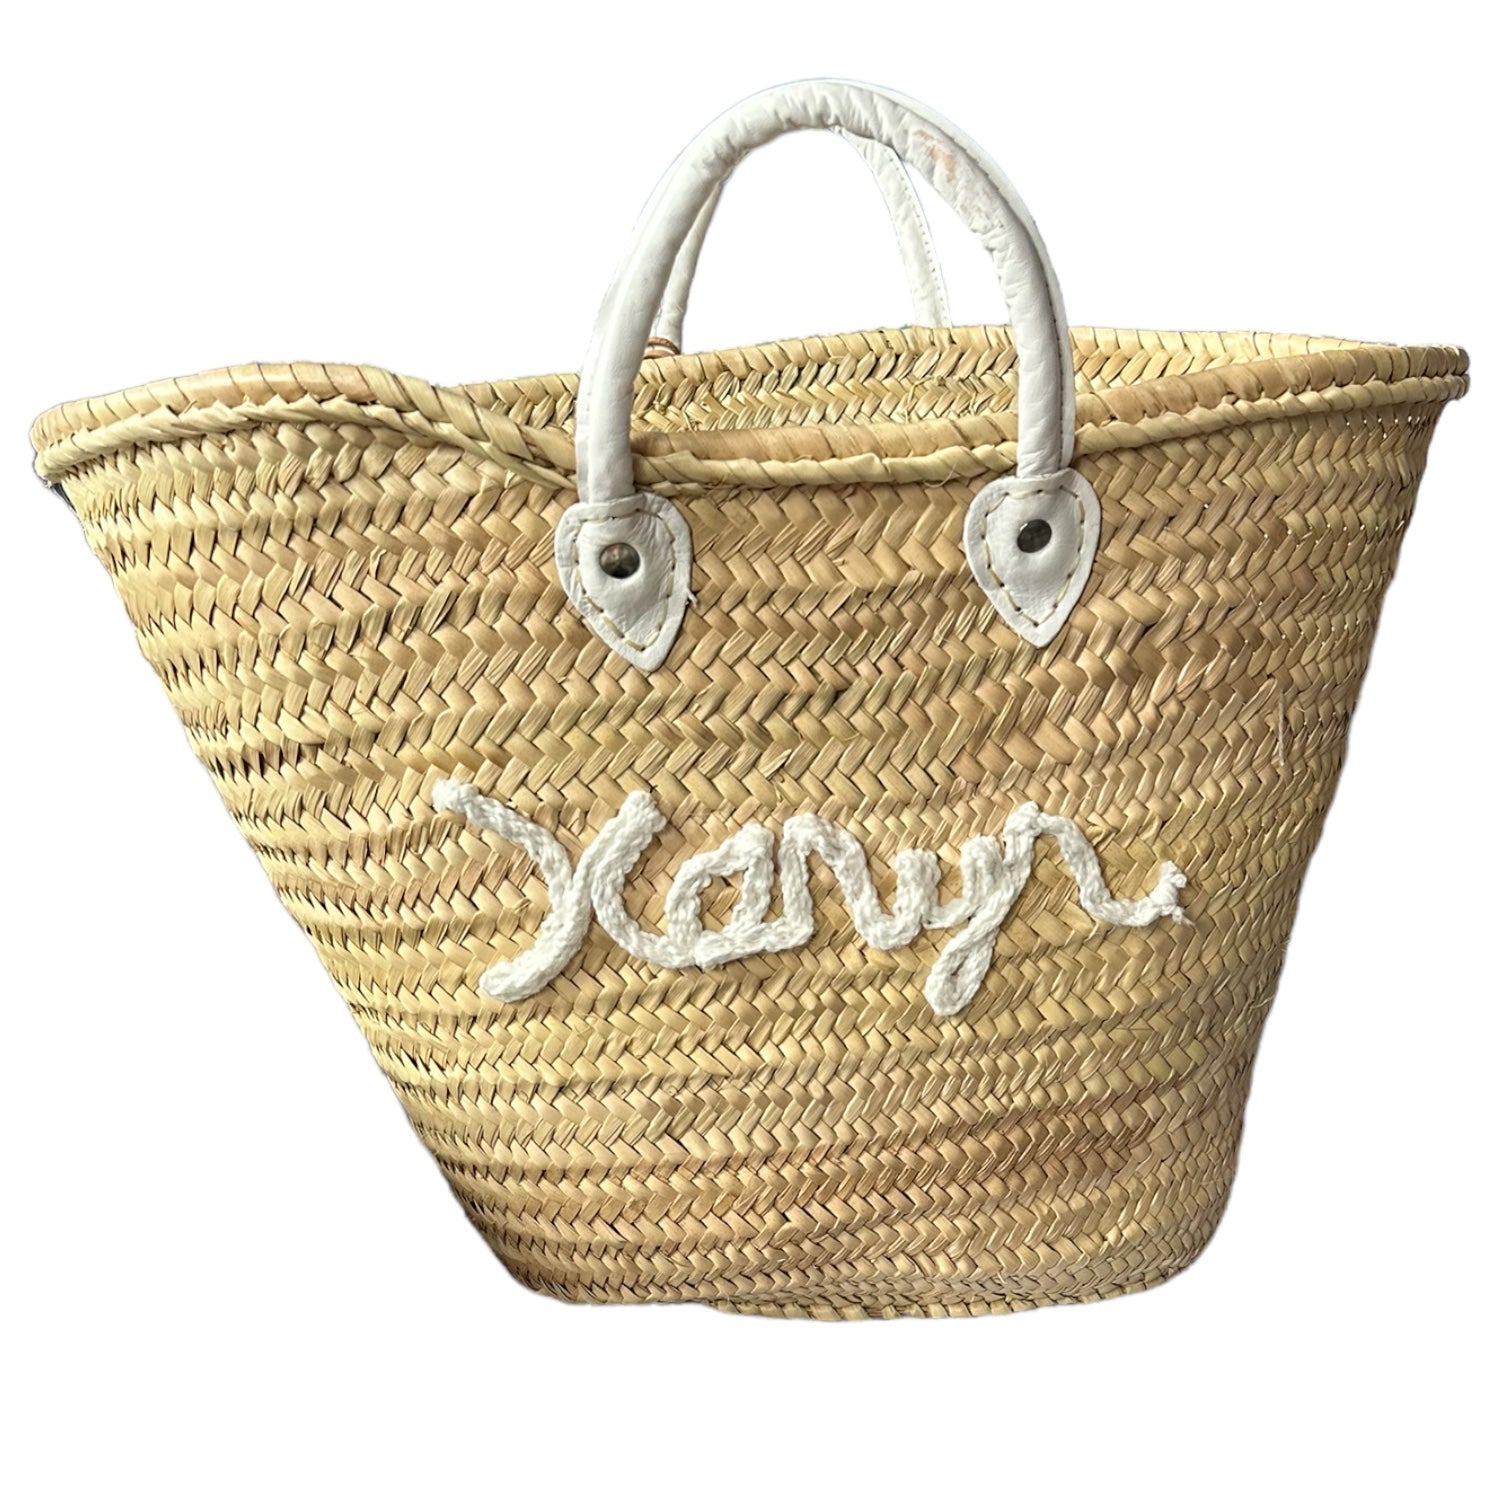 Big Embroidered Bag / Basket / French Market Basket / Straw Basket - white - Premium  from Tricia Lowenfield Design 